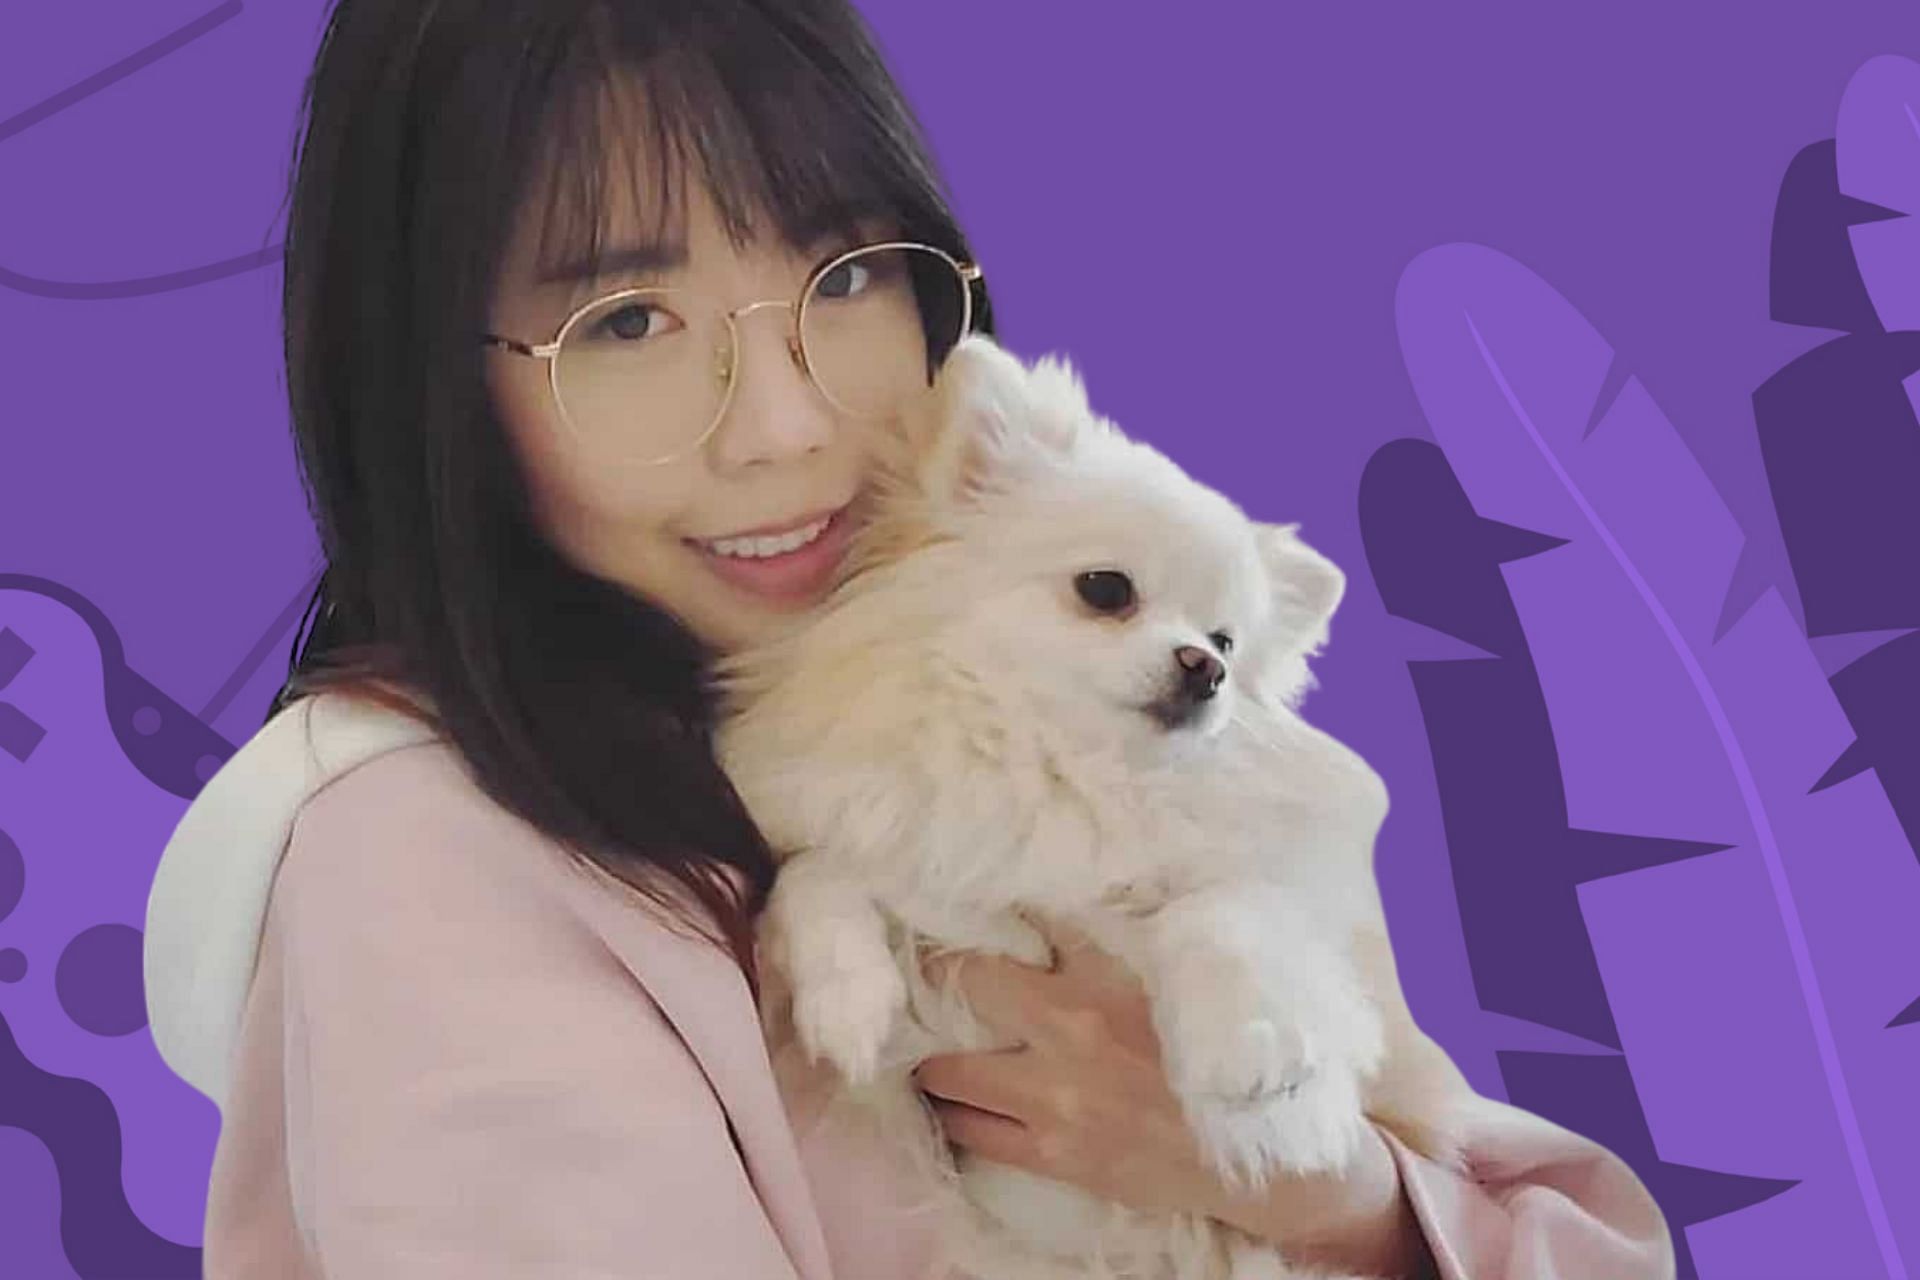 LilyPichu&#039;s pup Temmie made a cameo appearance in a recent stream (Image via Sportskeeda)